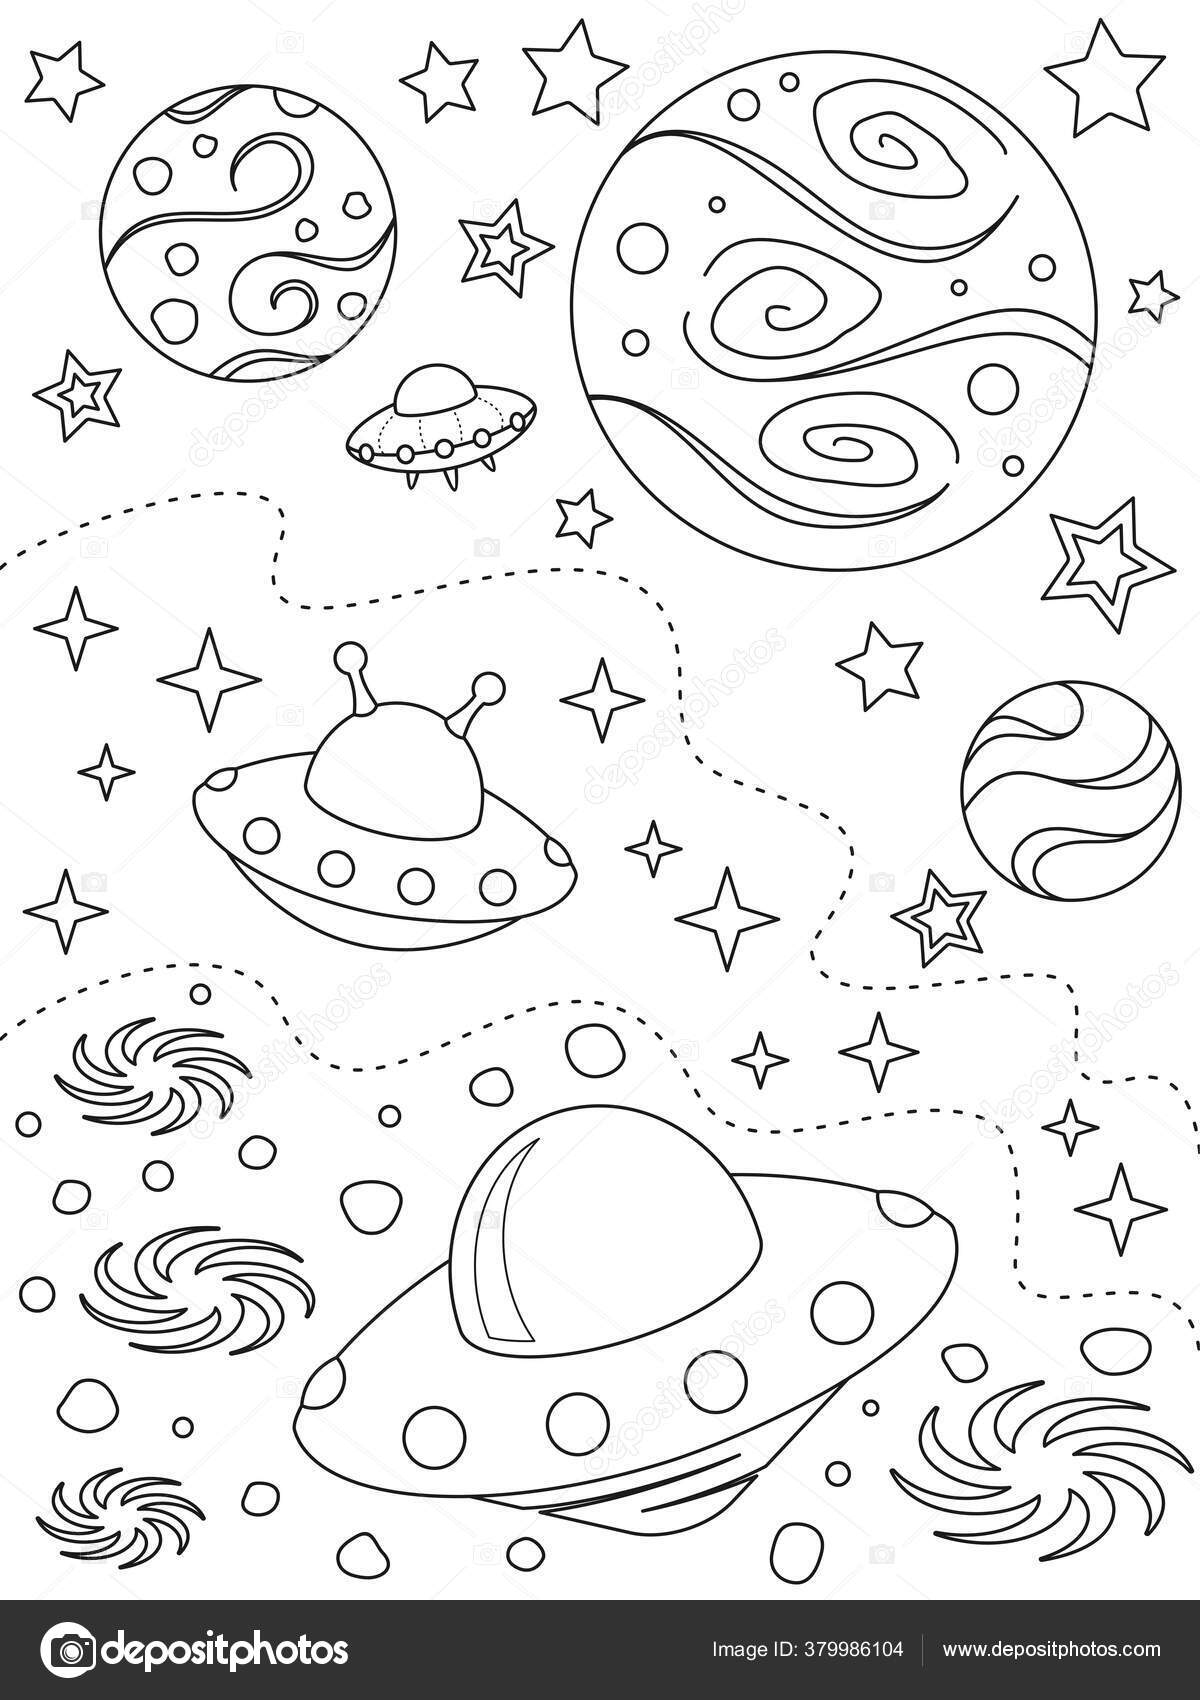 Coloring Page Different Planets Alien Spaceships Nebulae Stars ...